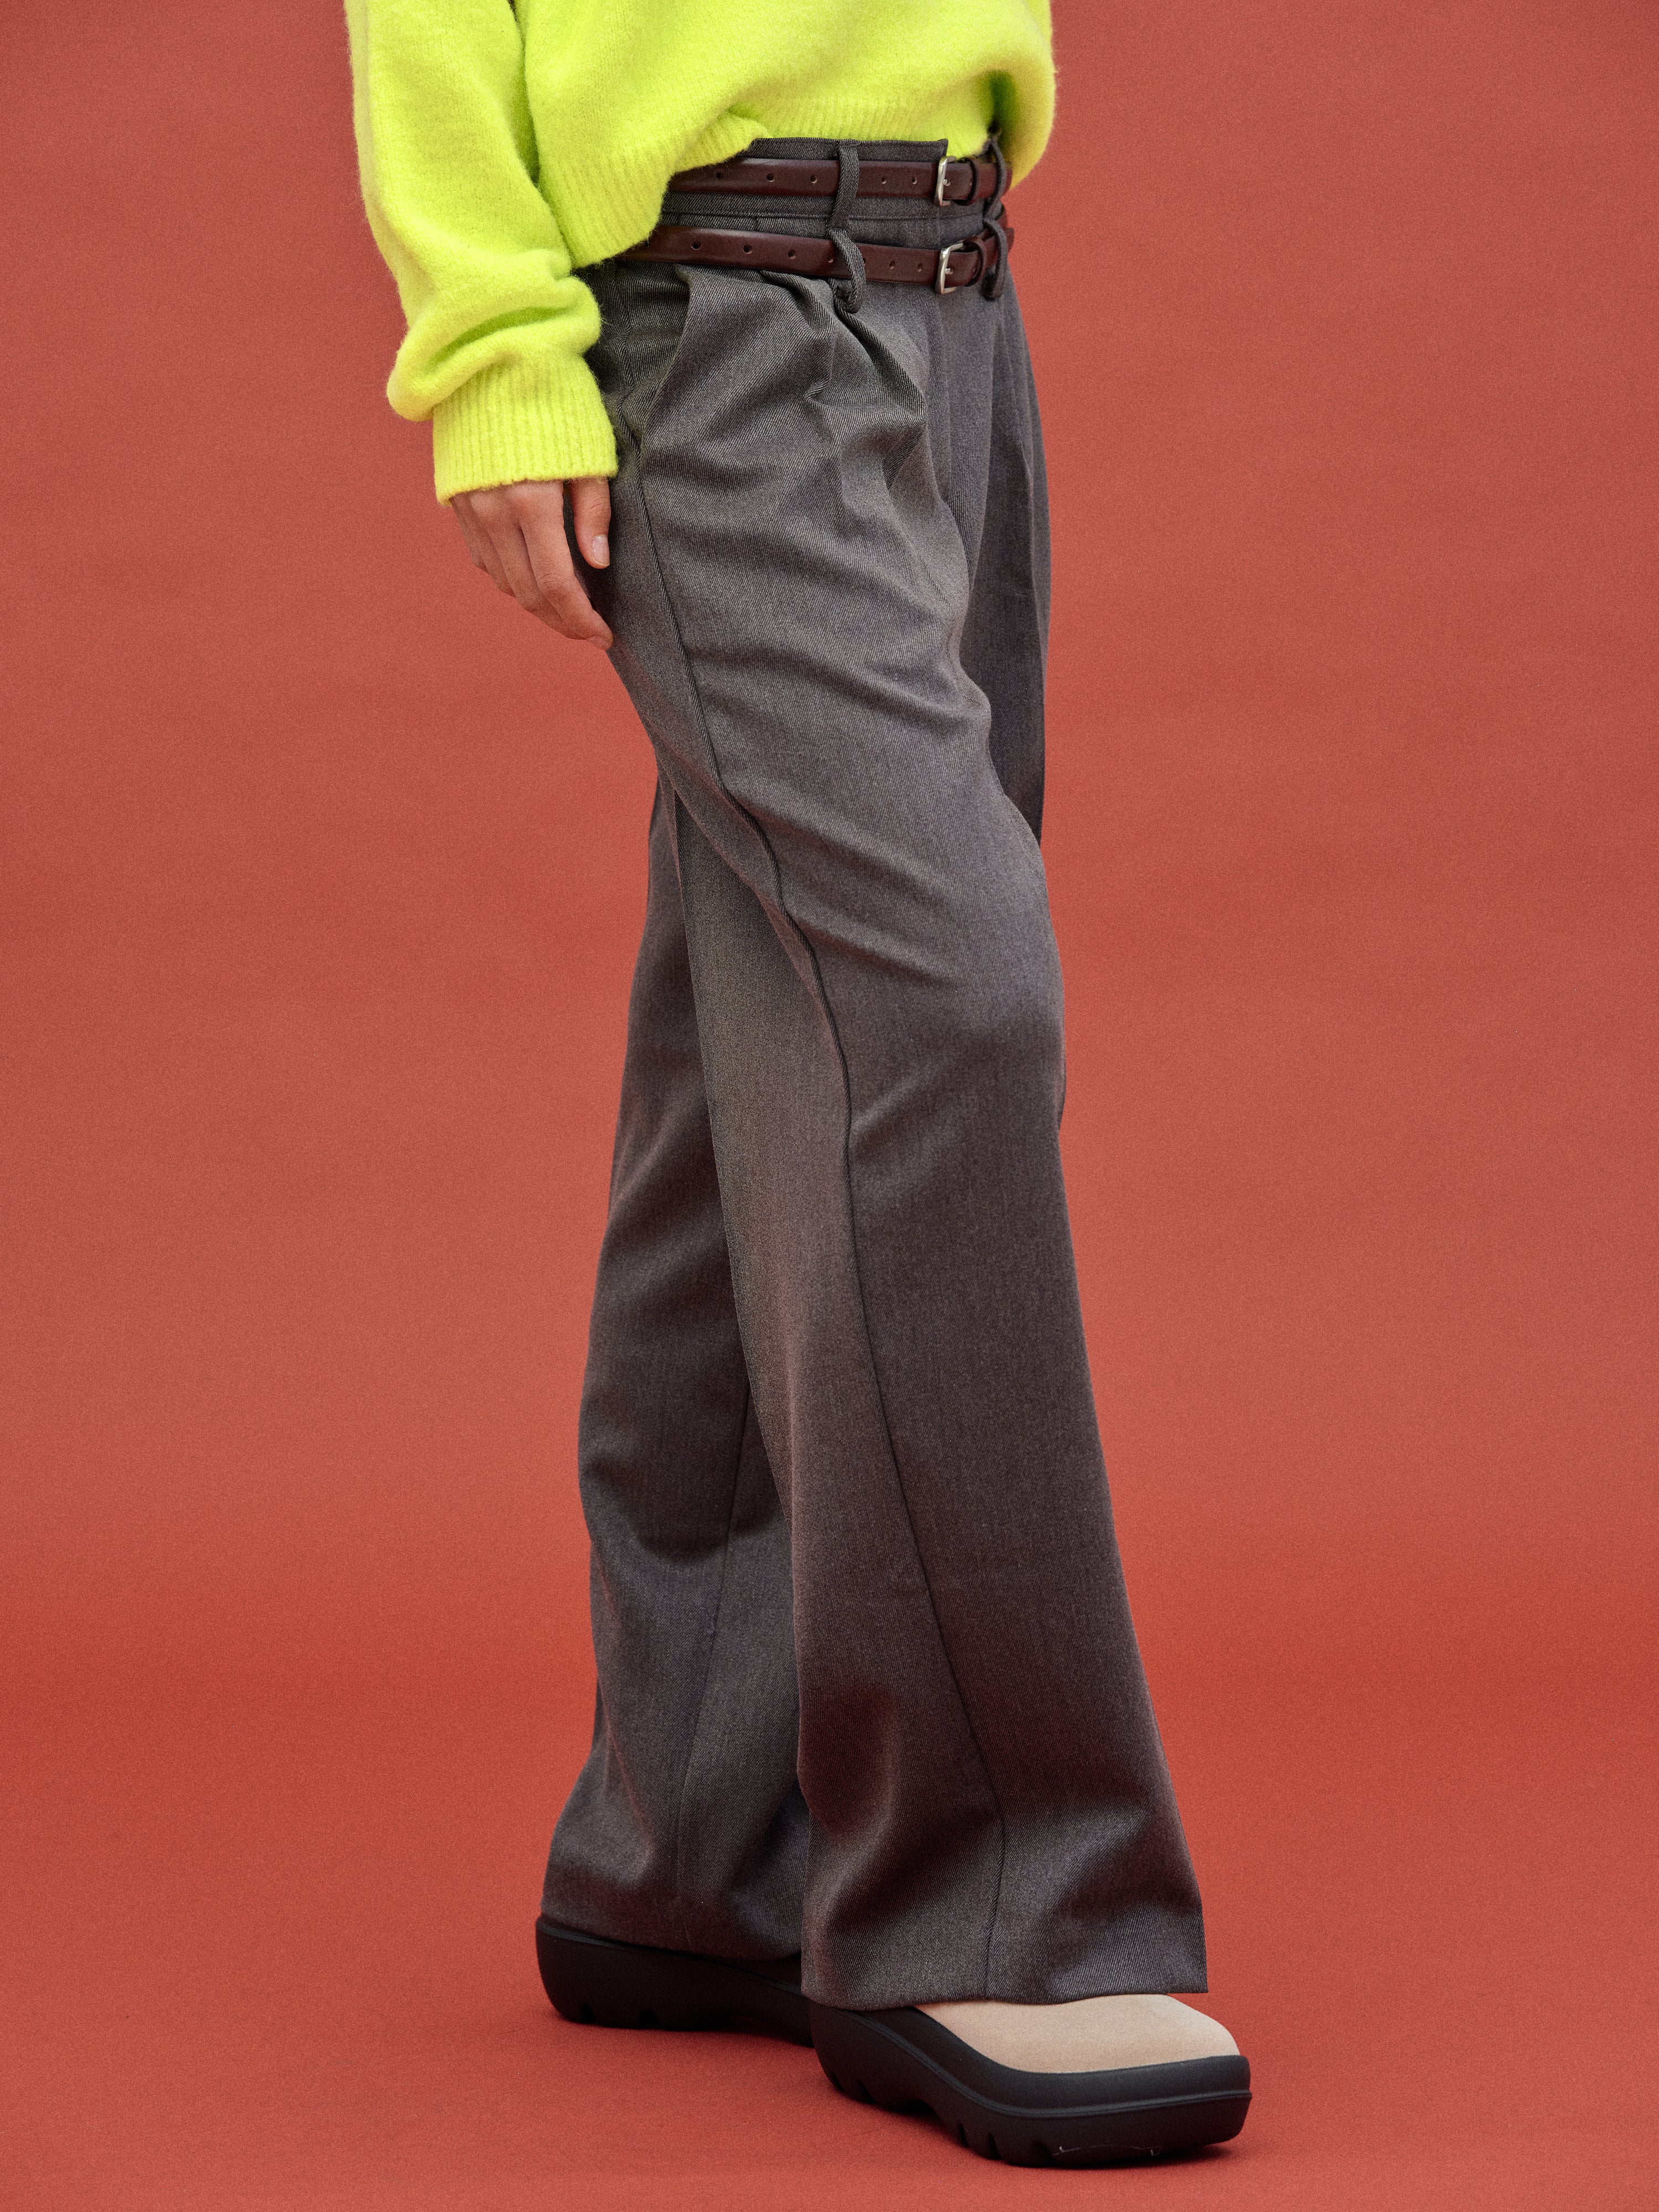 IN STOCK  Double Belt Loop Trousers with 2 belts  White  S H E L O N G Z